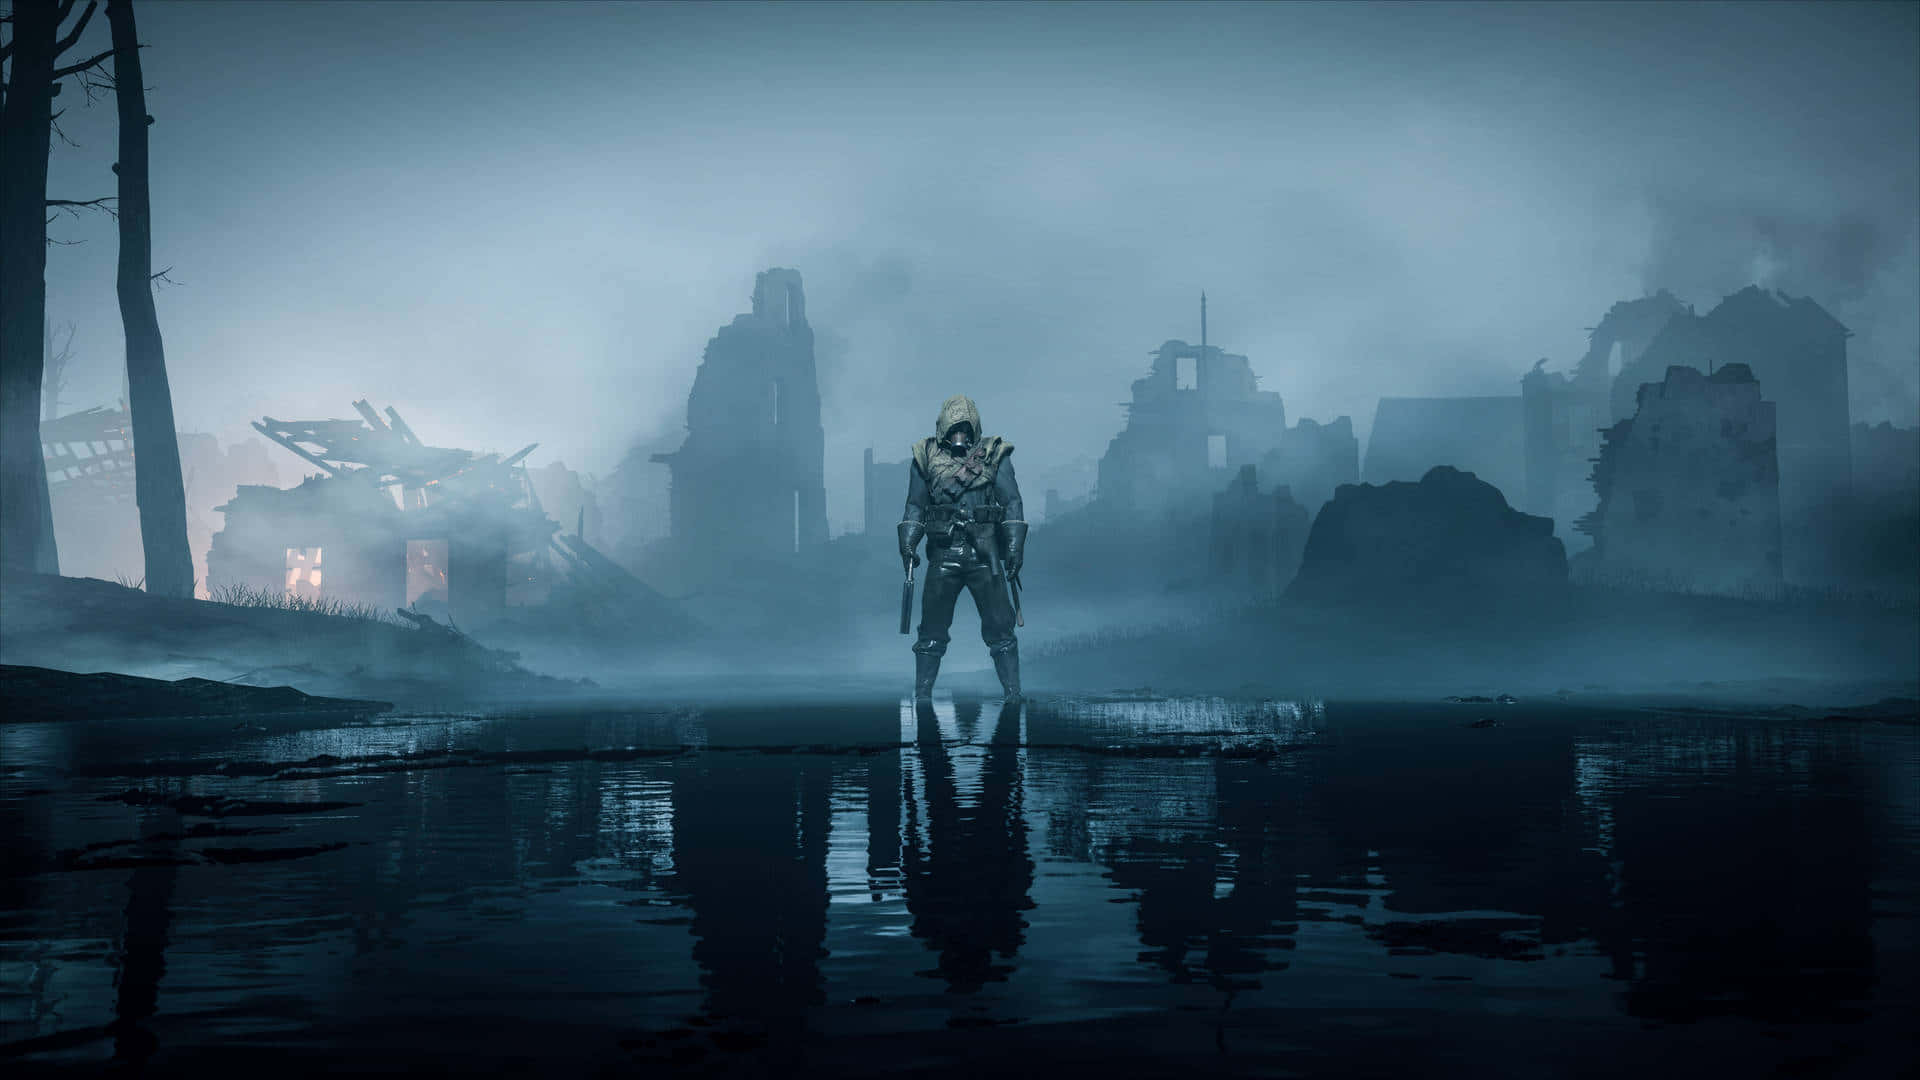 A Man Standing In A Foggy Watery Area